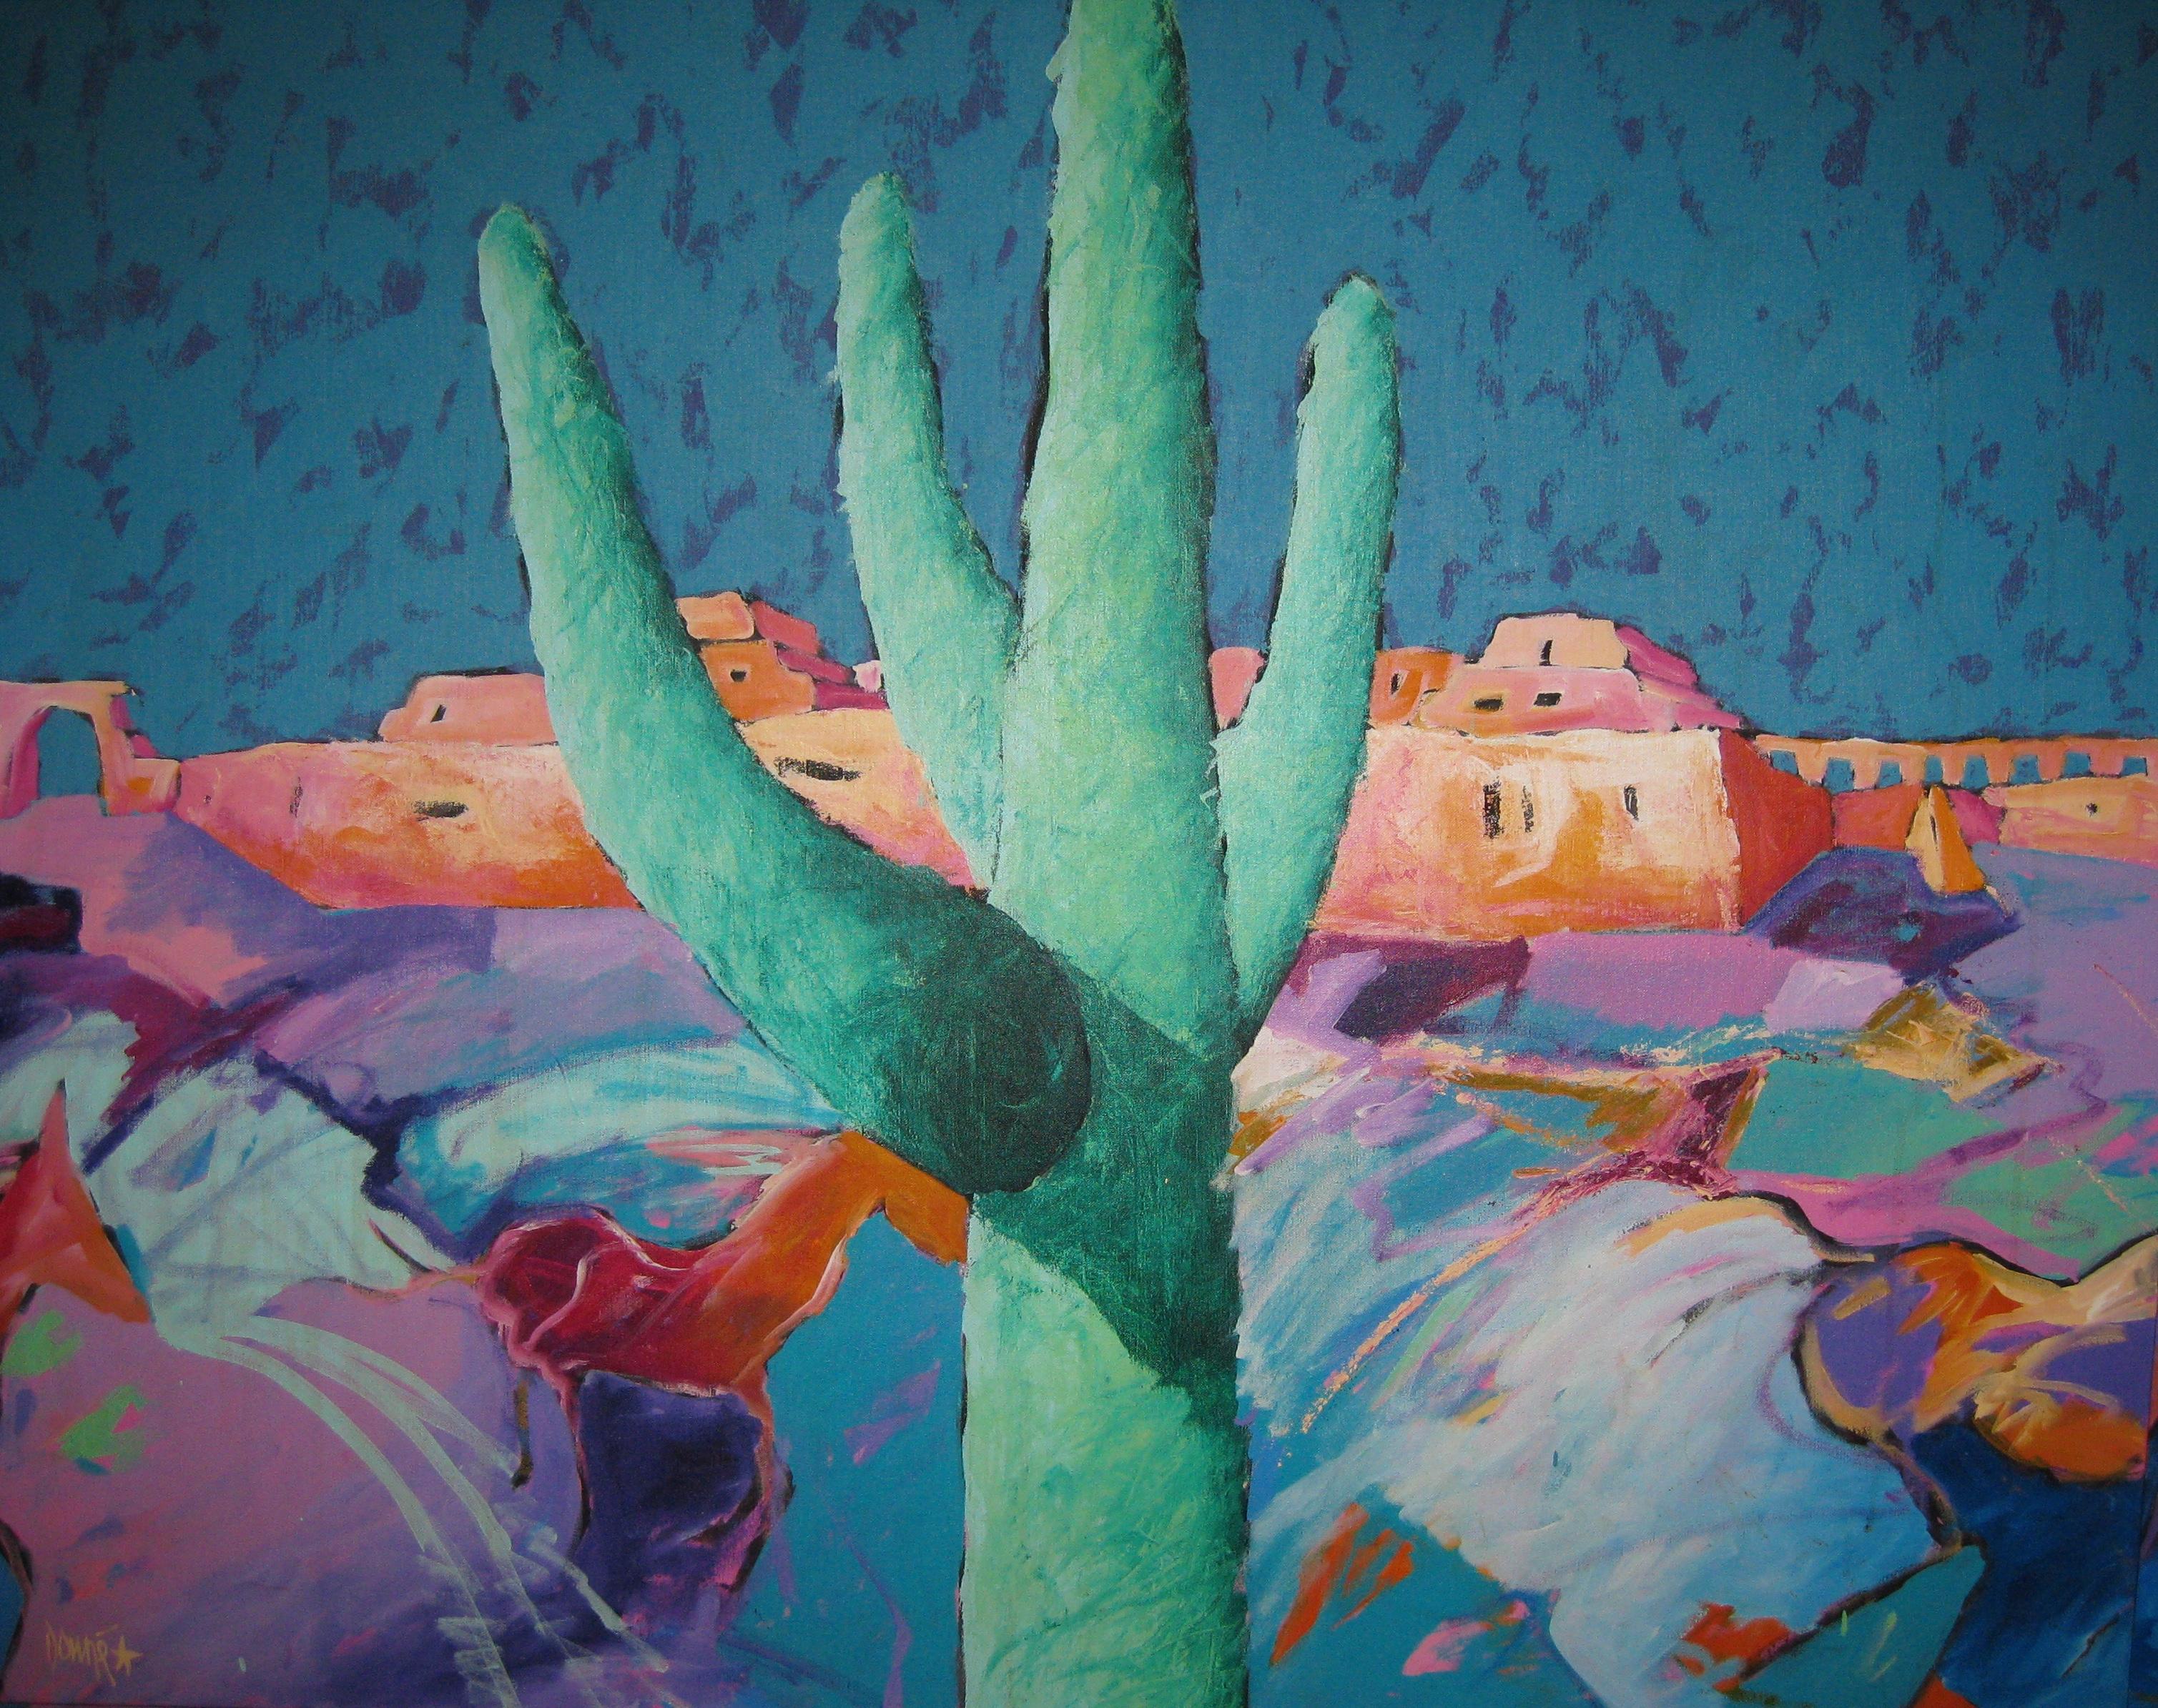 Southwestern modern contemporary oil painting on canvas by Downe Burns.
Downe Burns is a notable artist from Texas. He is largely a self-taught artist with a distinct style that has almost universal appeal. Downe’s desire is to create works that